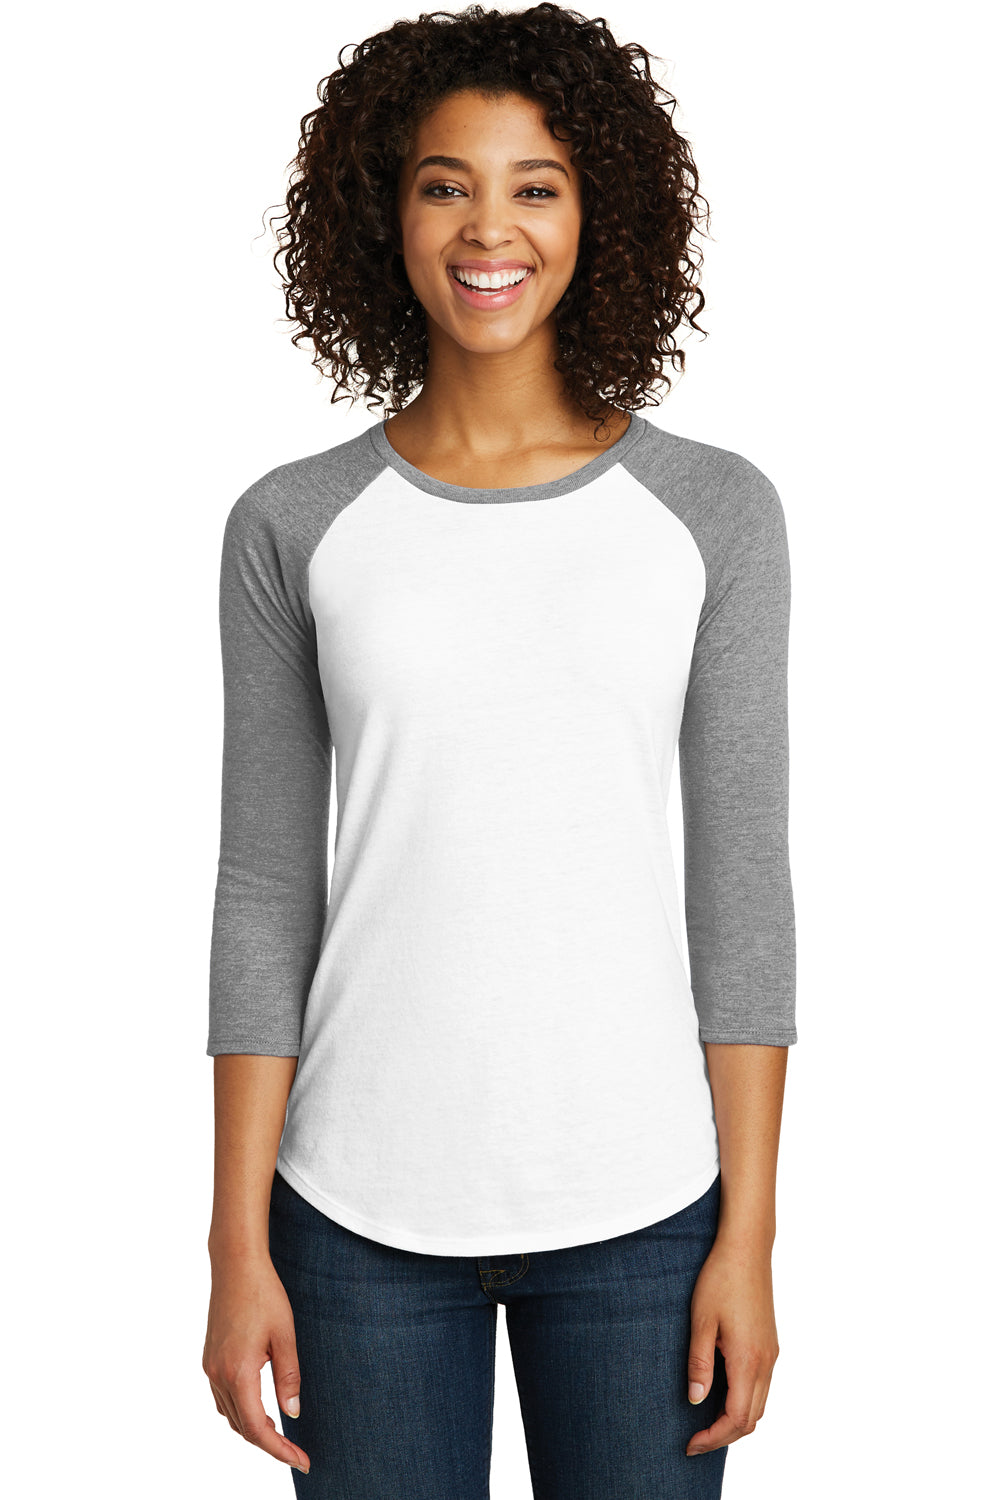 District DT6211 Womens Very Important 3/4 Sleeve Crewneck T-Shirt White/Heather Light Grey Front